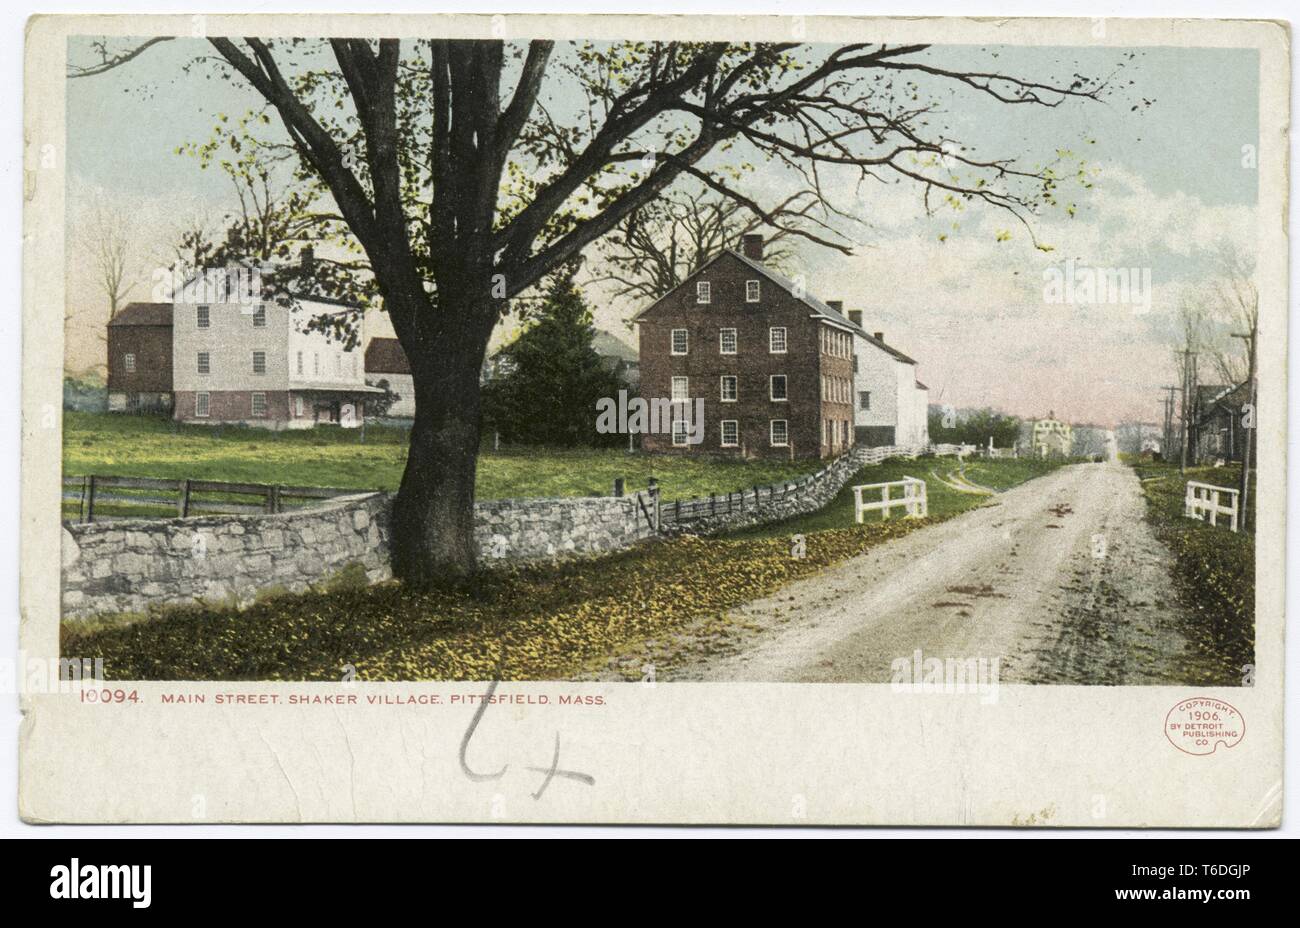 Postcard of Main Street in Shaker Village, Pittsfield, Massachusetts, 1914. From the New York Public Library. () Stock Photo